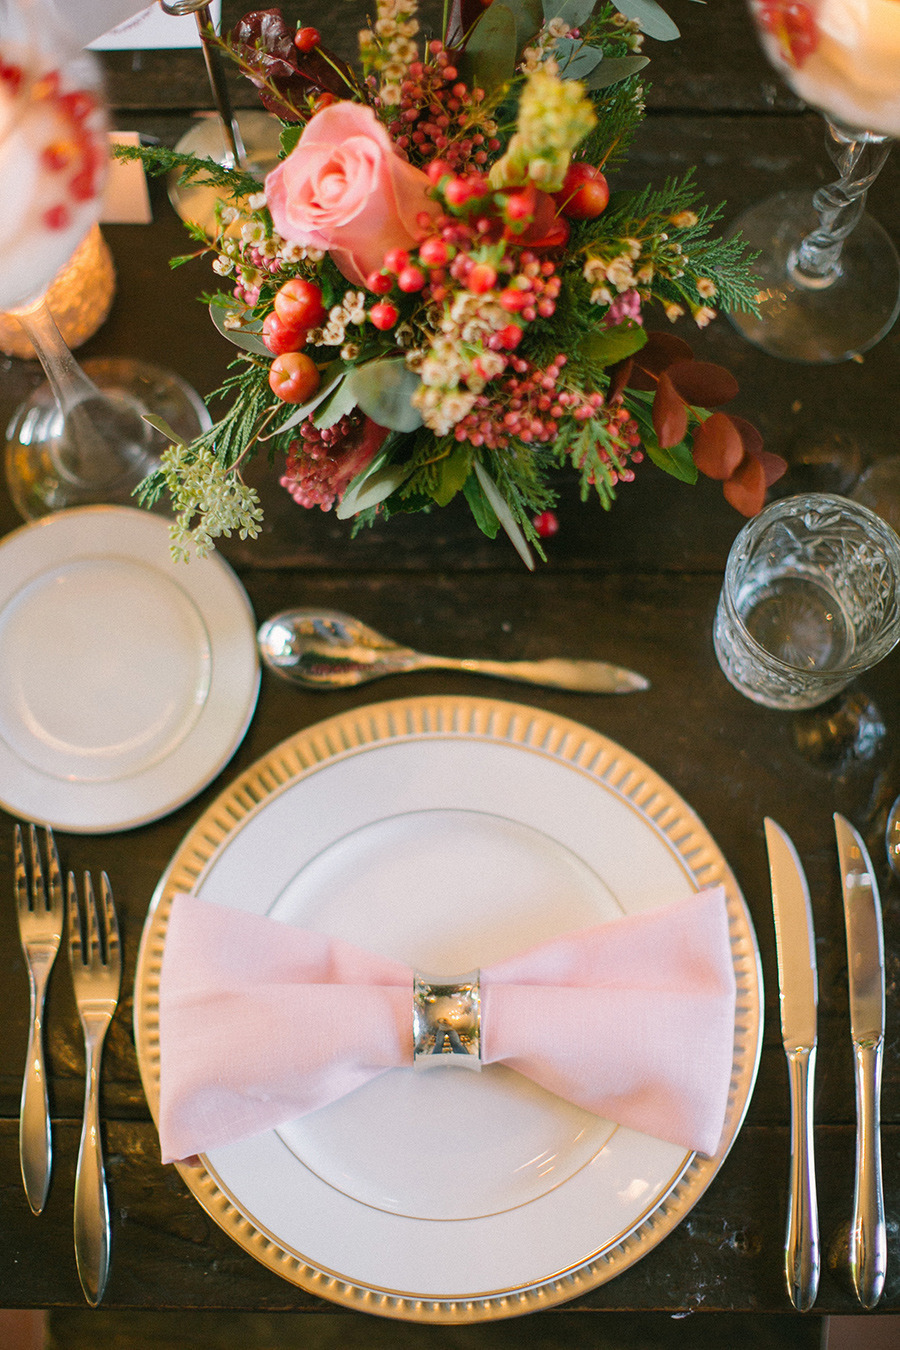 winter wedding place setting - Boho Chic Wedding Inspiration Shoot from Anna Roussos Photography - annaroussos.com | Read more : https://www.fabmood.com/boho-chic-wedding-inspiration-shoot-anna-roussos-photography